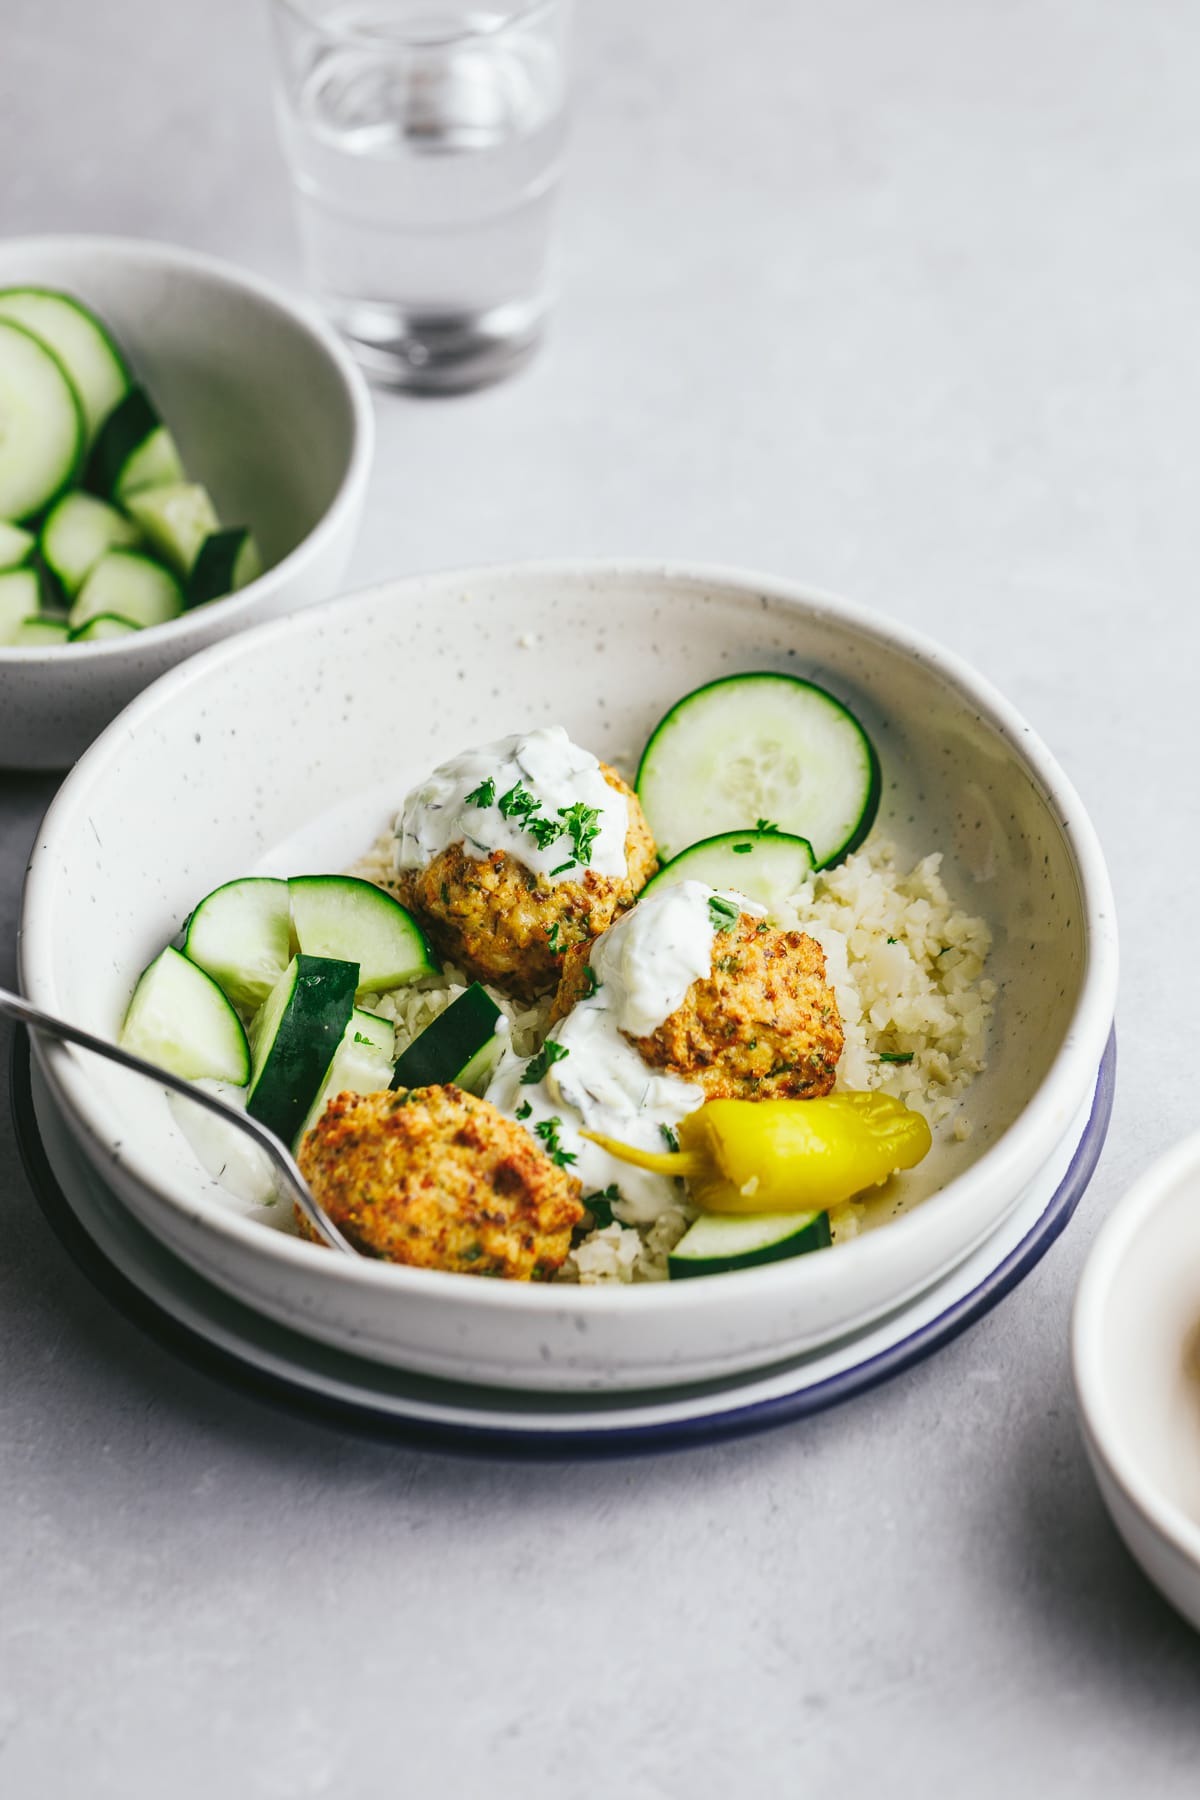 Greek chicken meatballs in a bowl with cauli rice, cucumbers and tzaziki.